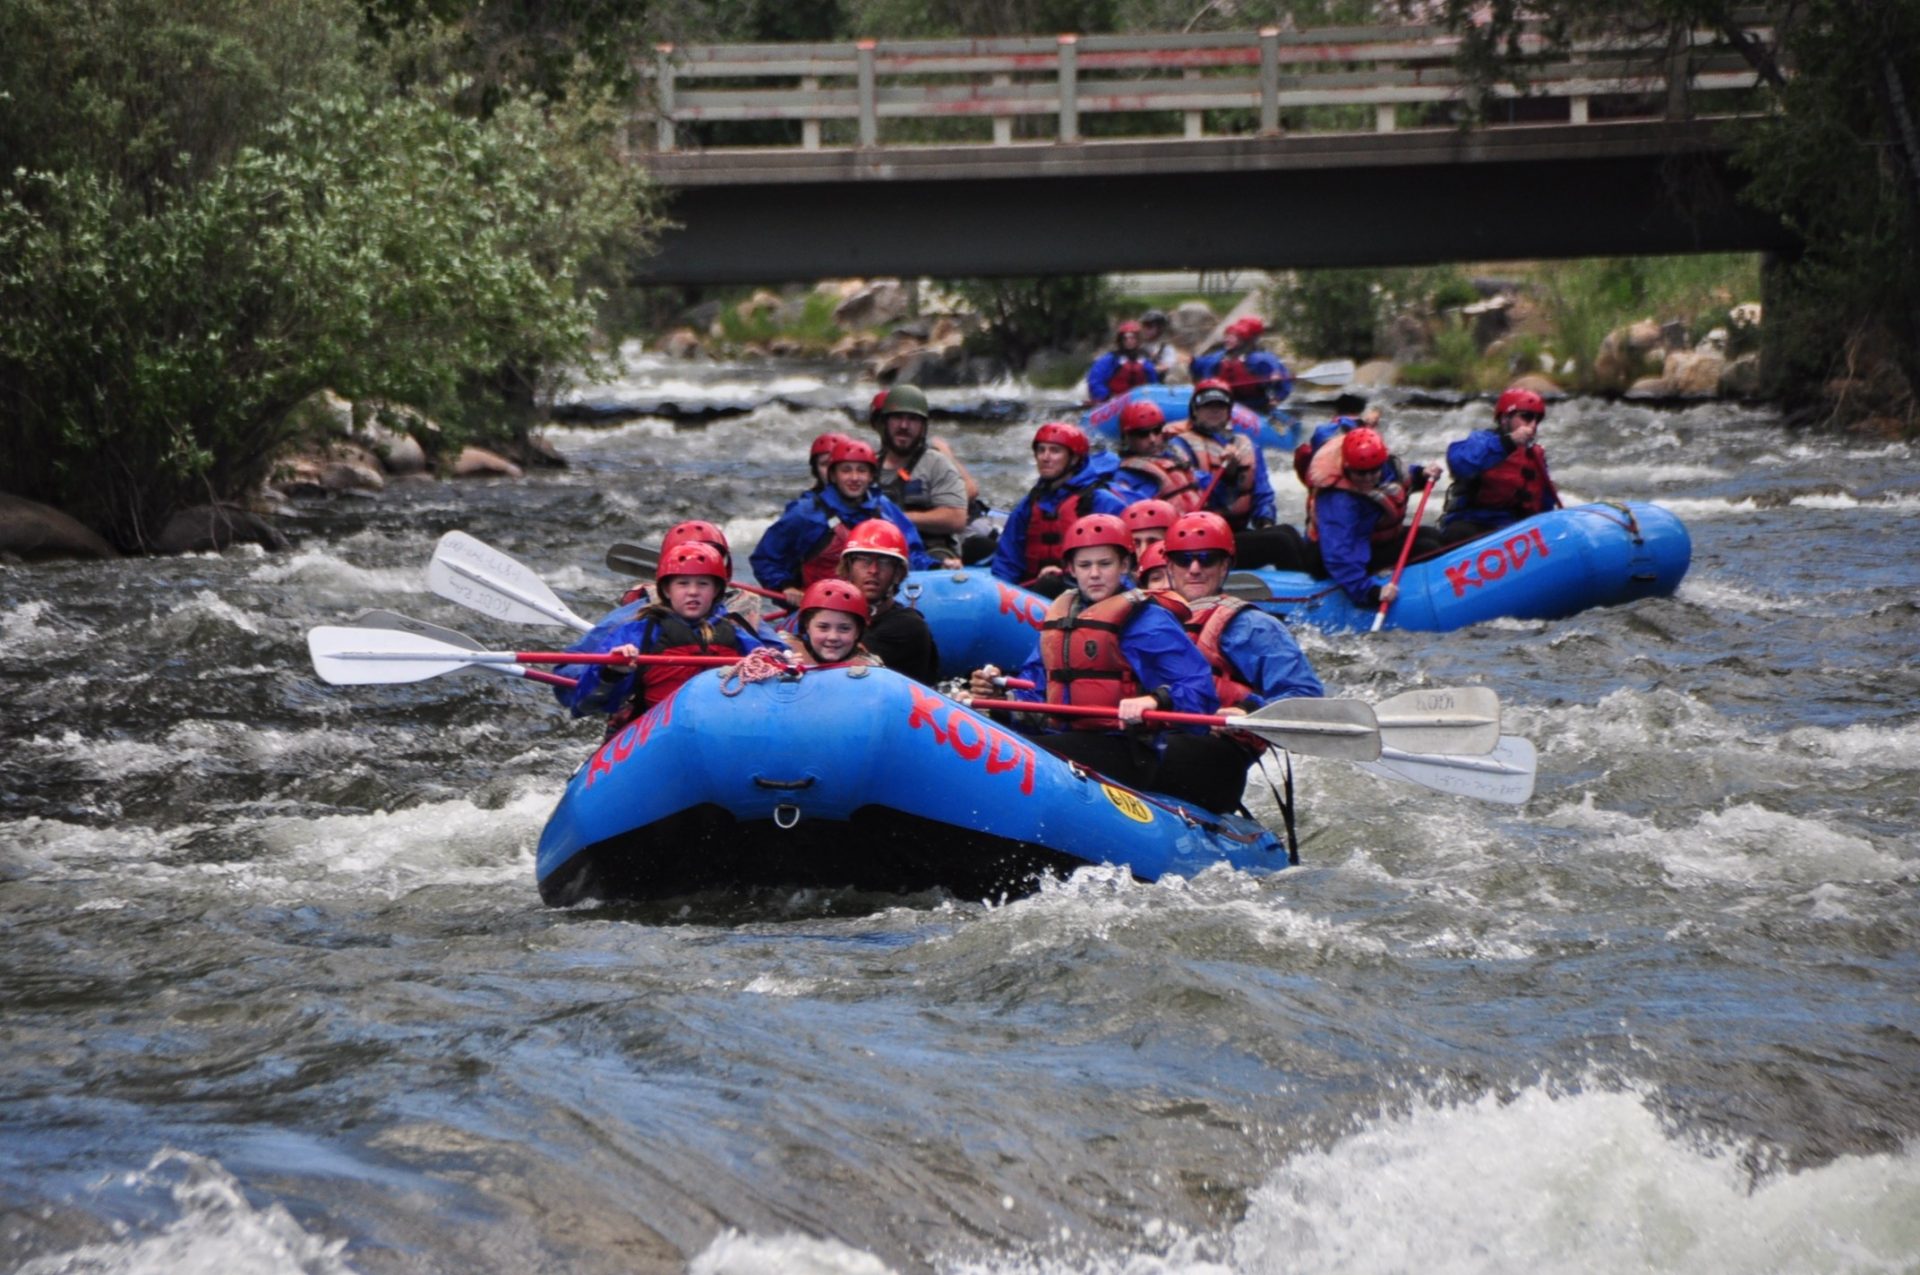 Tourist boats going forward while Clear Creek whitewater rafting